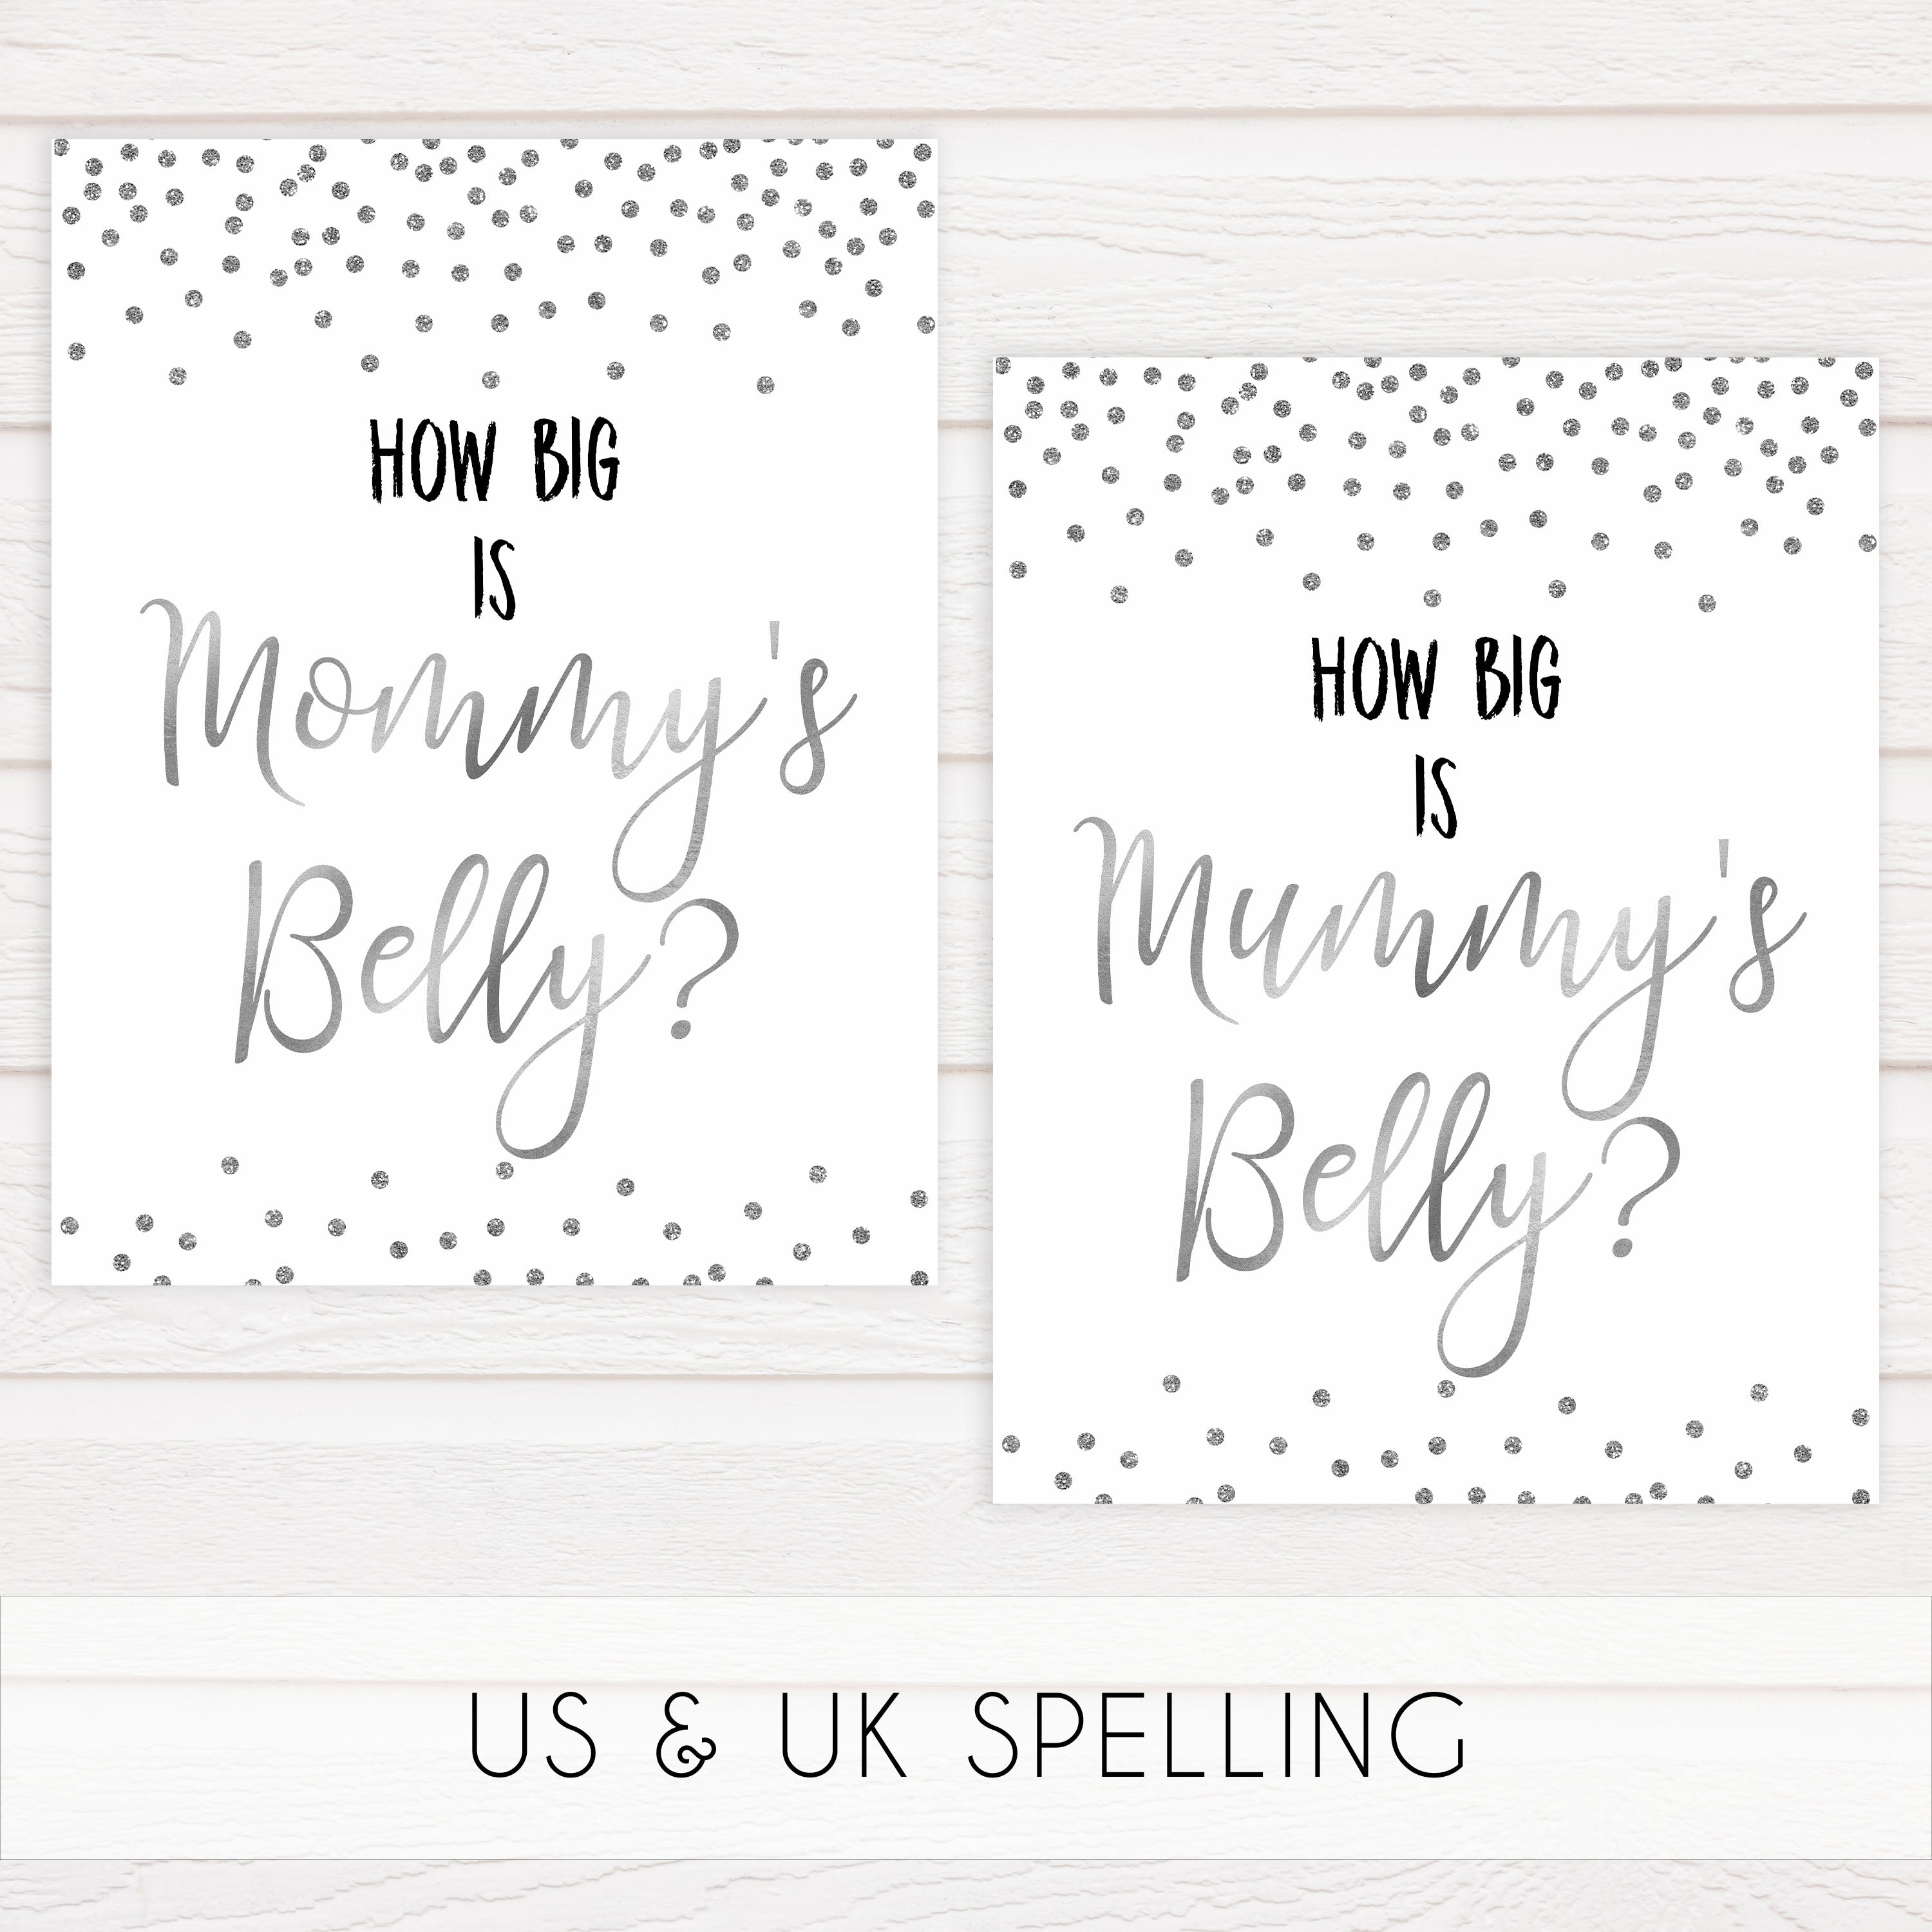 how big is mommys belly, mommys belly game, Printable baby shower games, baby silver glitter fun baby games, baby shower games, fun baby shower ideas, top baby shower ideas, silver glitter shower baby shower, friends baby shower ideas